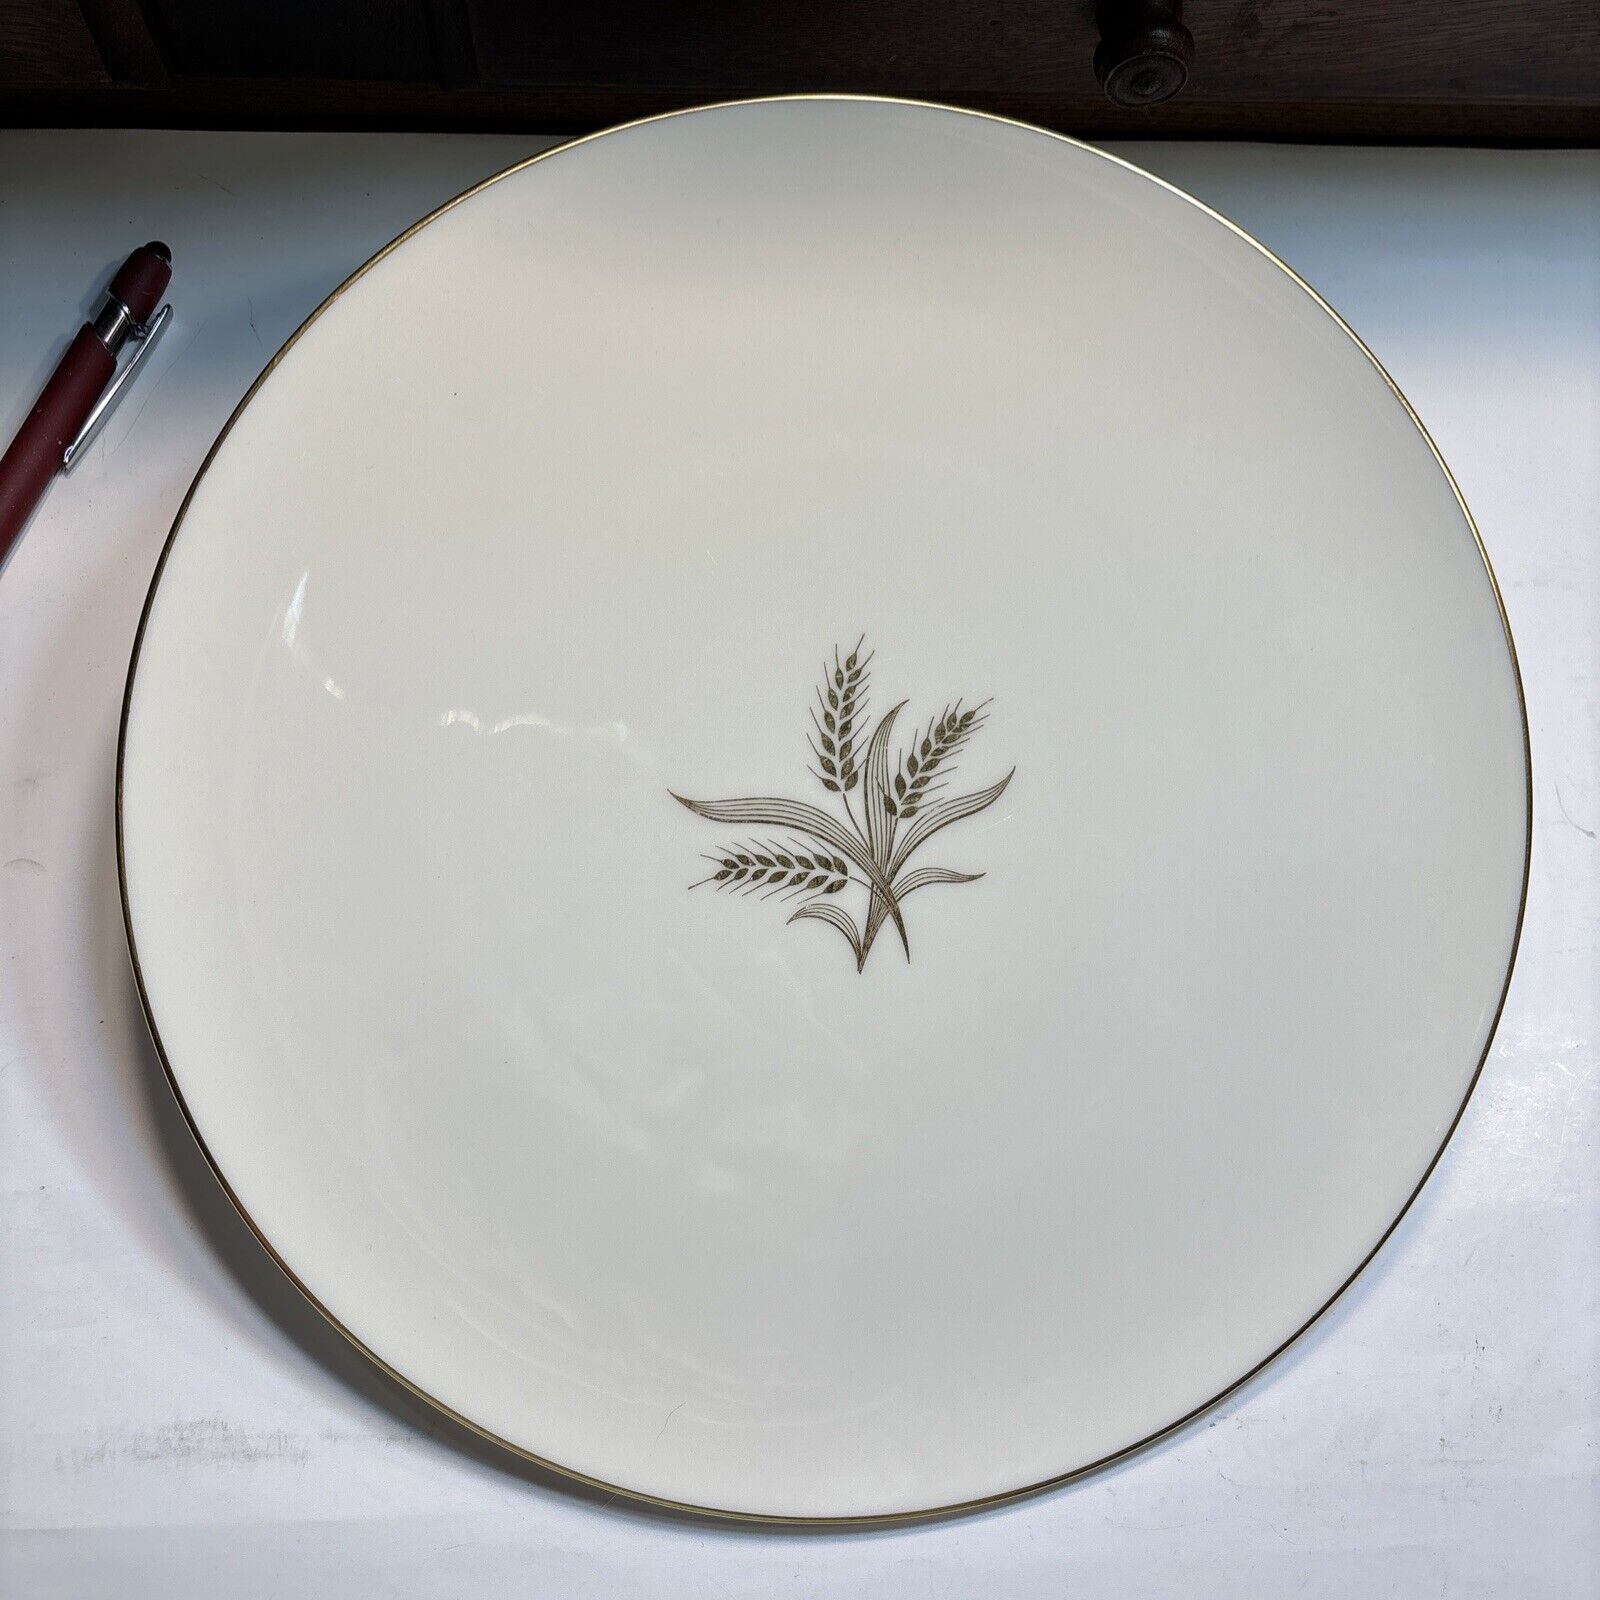 VTG DISCONTINUED LENOX CHINA WHEAT PATTERN DINNER PLATE 10 1/2\